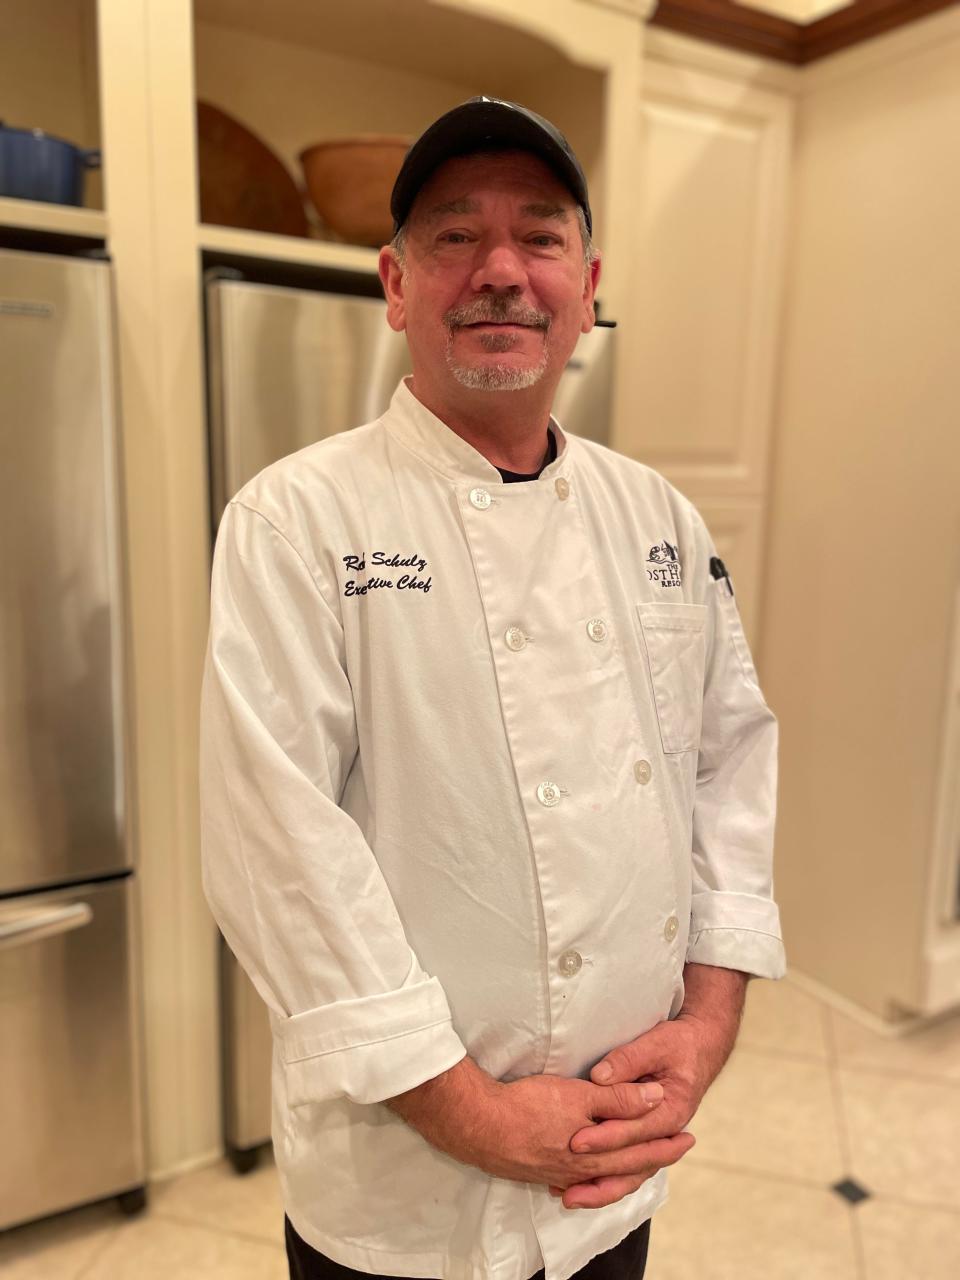 Rod Schulz is the executive chef at the Osthoff Resort in Elkhart Lake where he oversees the cooking school, the spa cafe menu and the resort's pastry program.